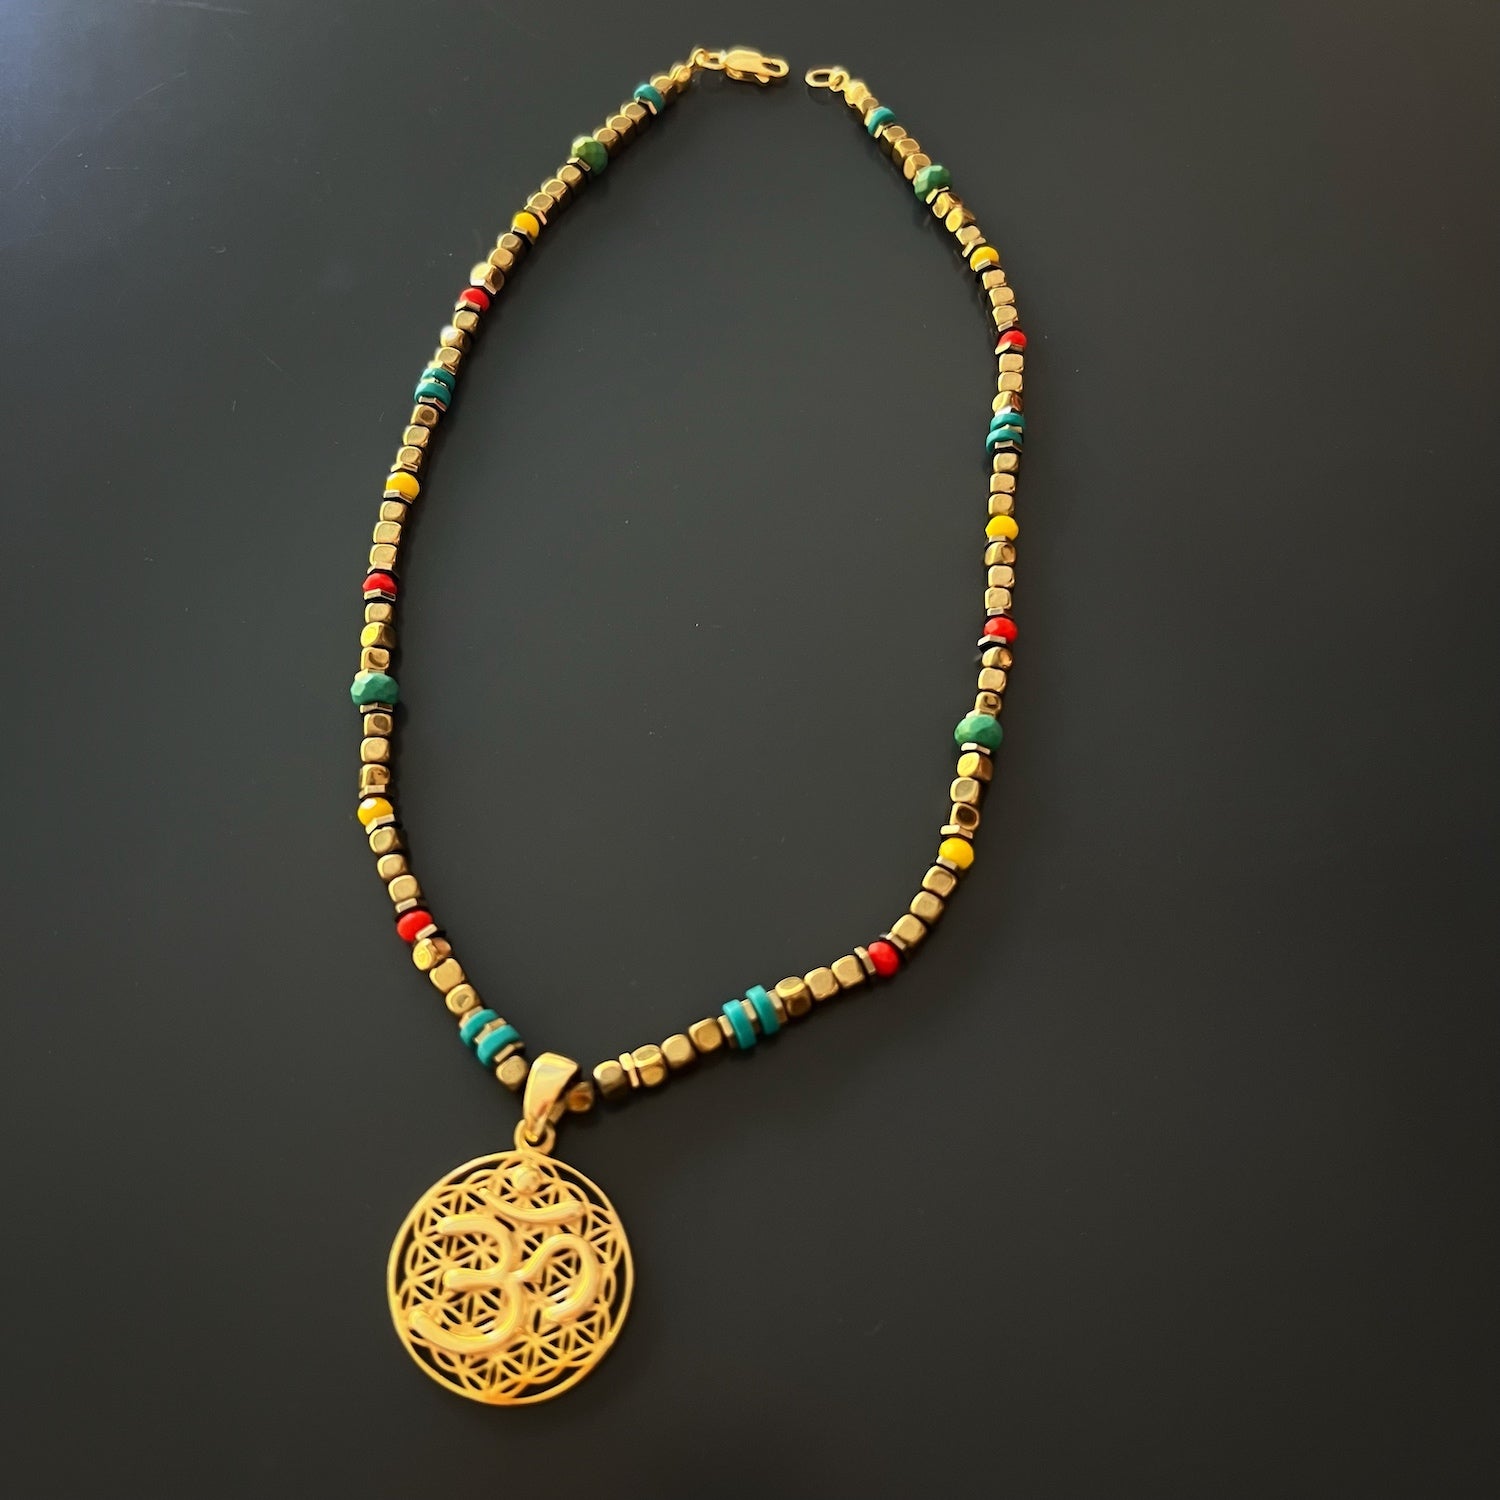 Turquoise stone beads, known for their calming properties, creating a visually appealing contrast with the gold elements in the Breathe Om Gold Necklace.